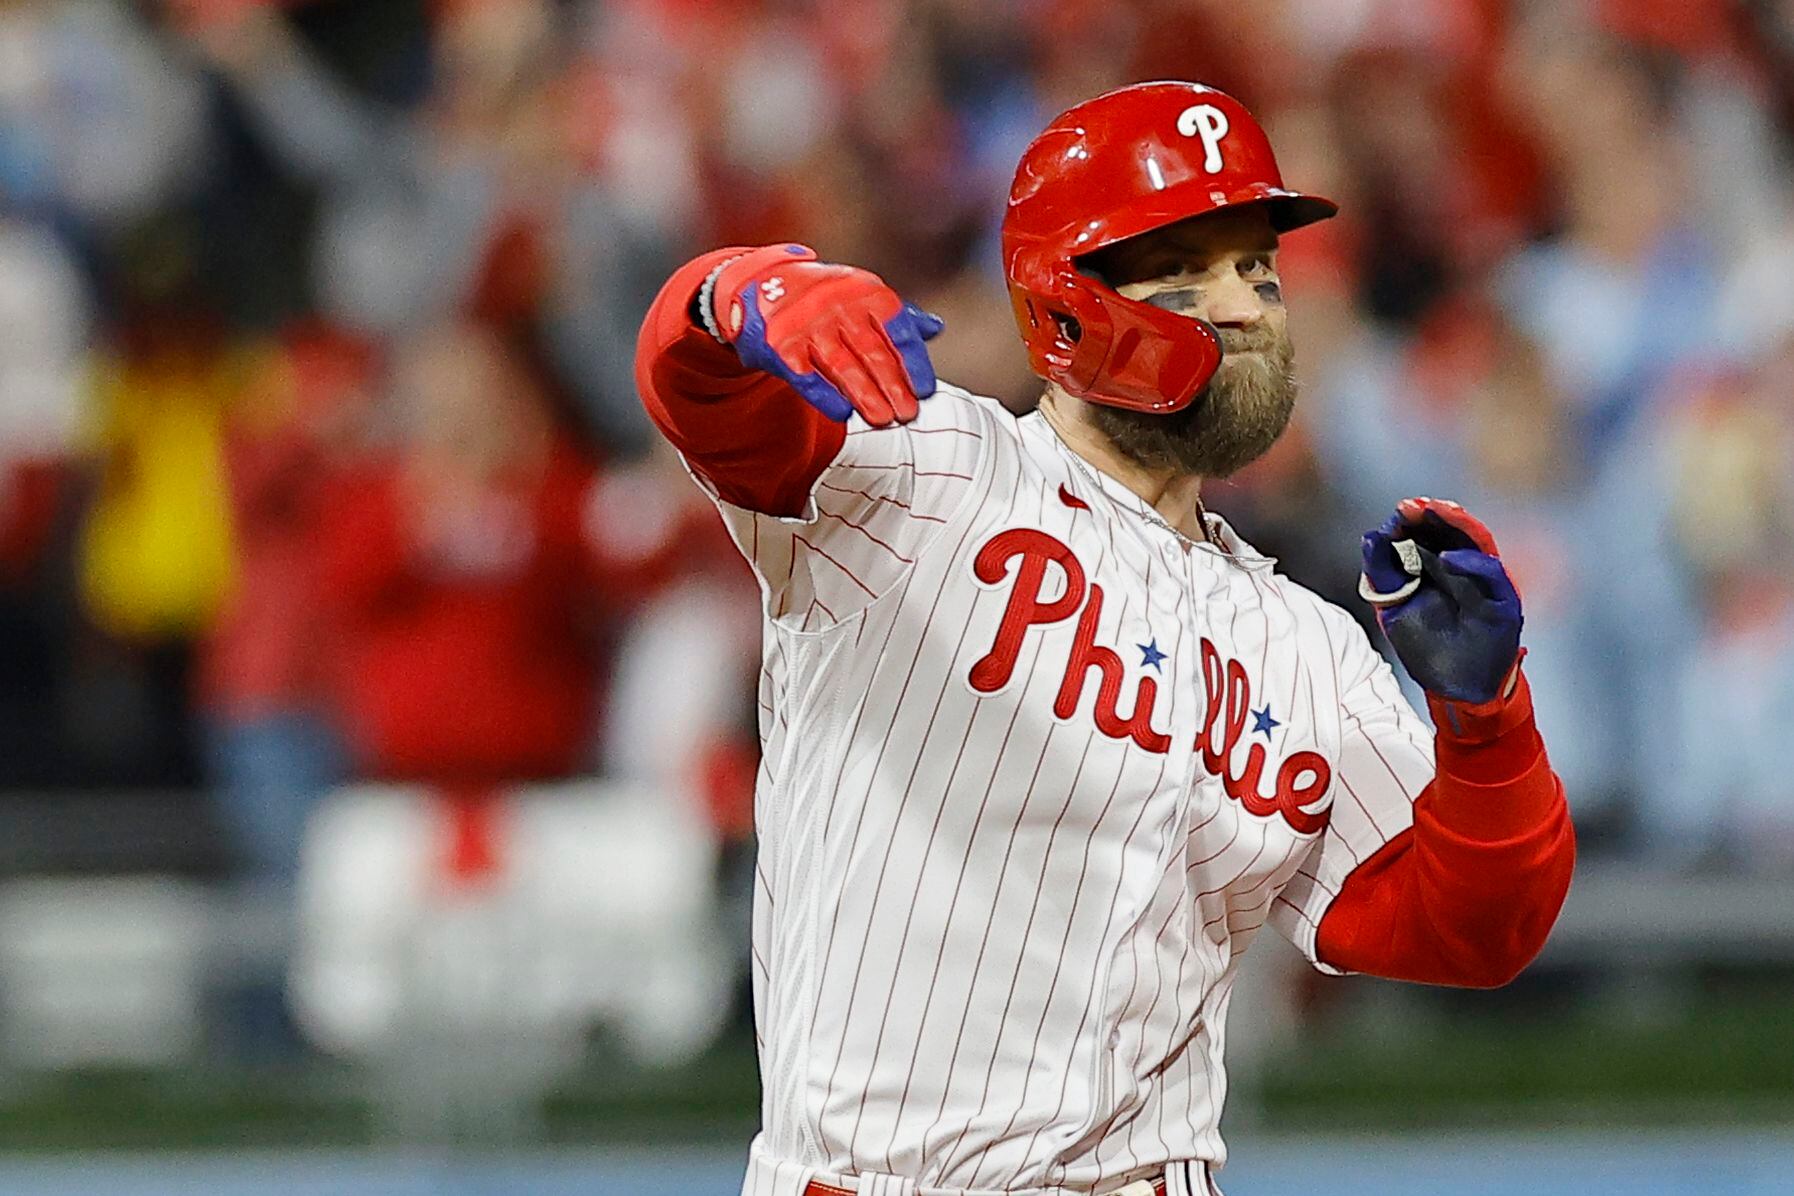 Harper 0-for-4 in return to lineup, Phillies lose big to Dodgers